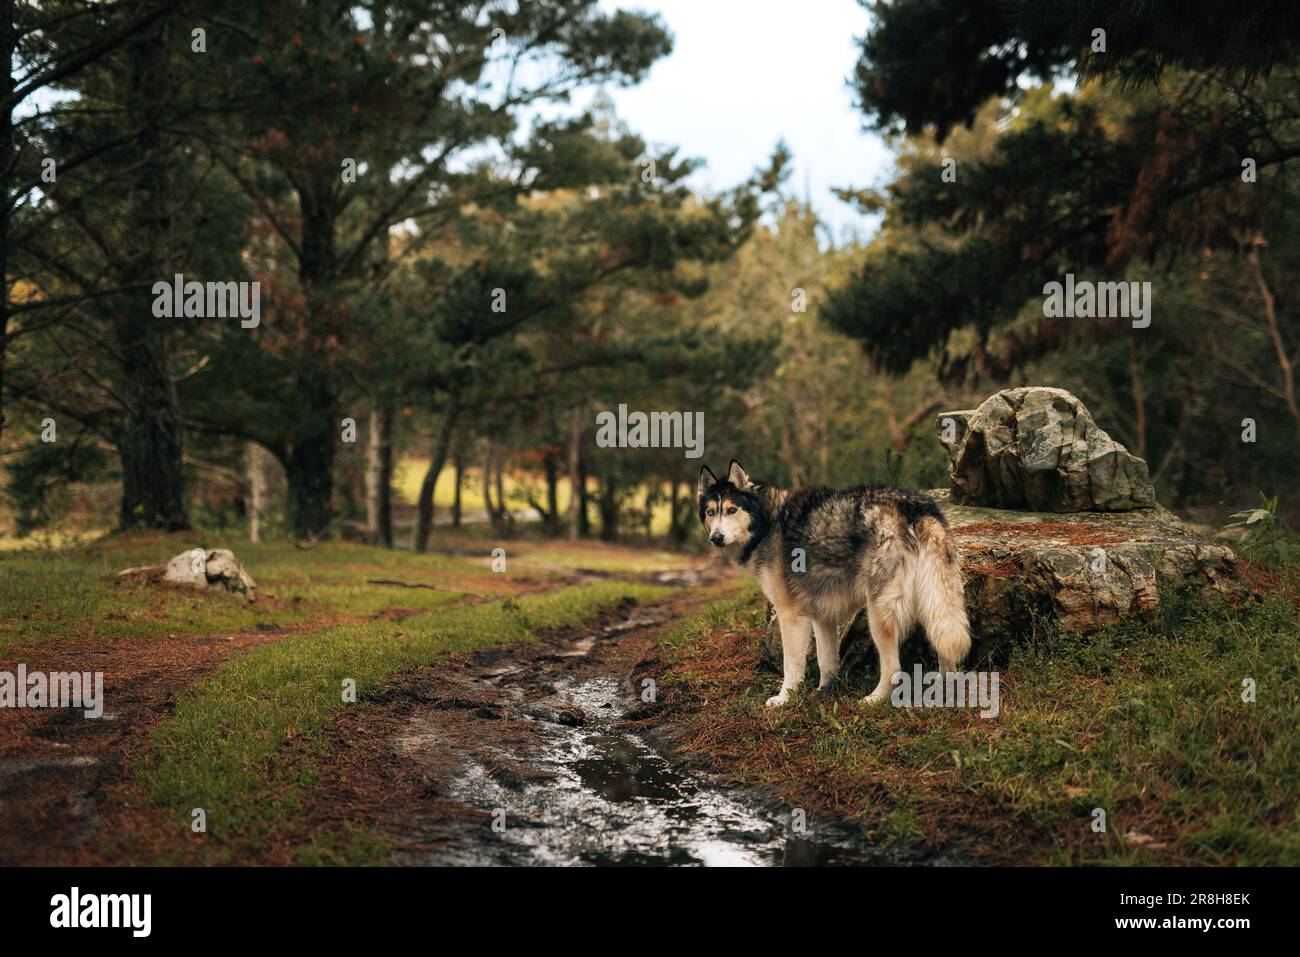 A Mackenzie River husky standing in a wooded area, surrounded by trees, water, and rocks Stock Photo